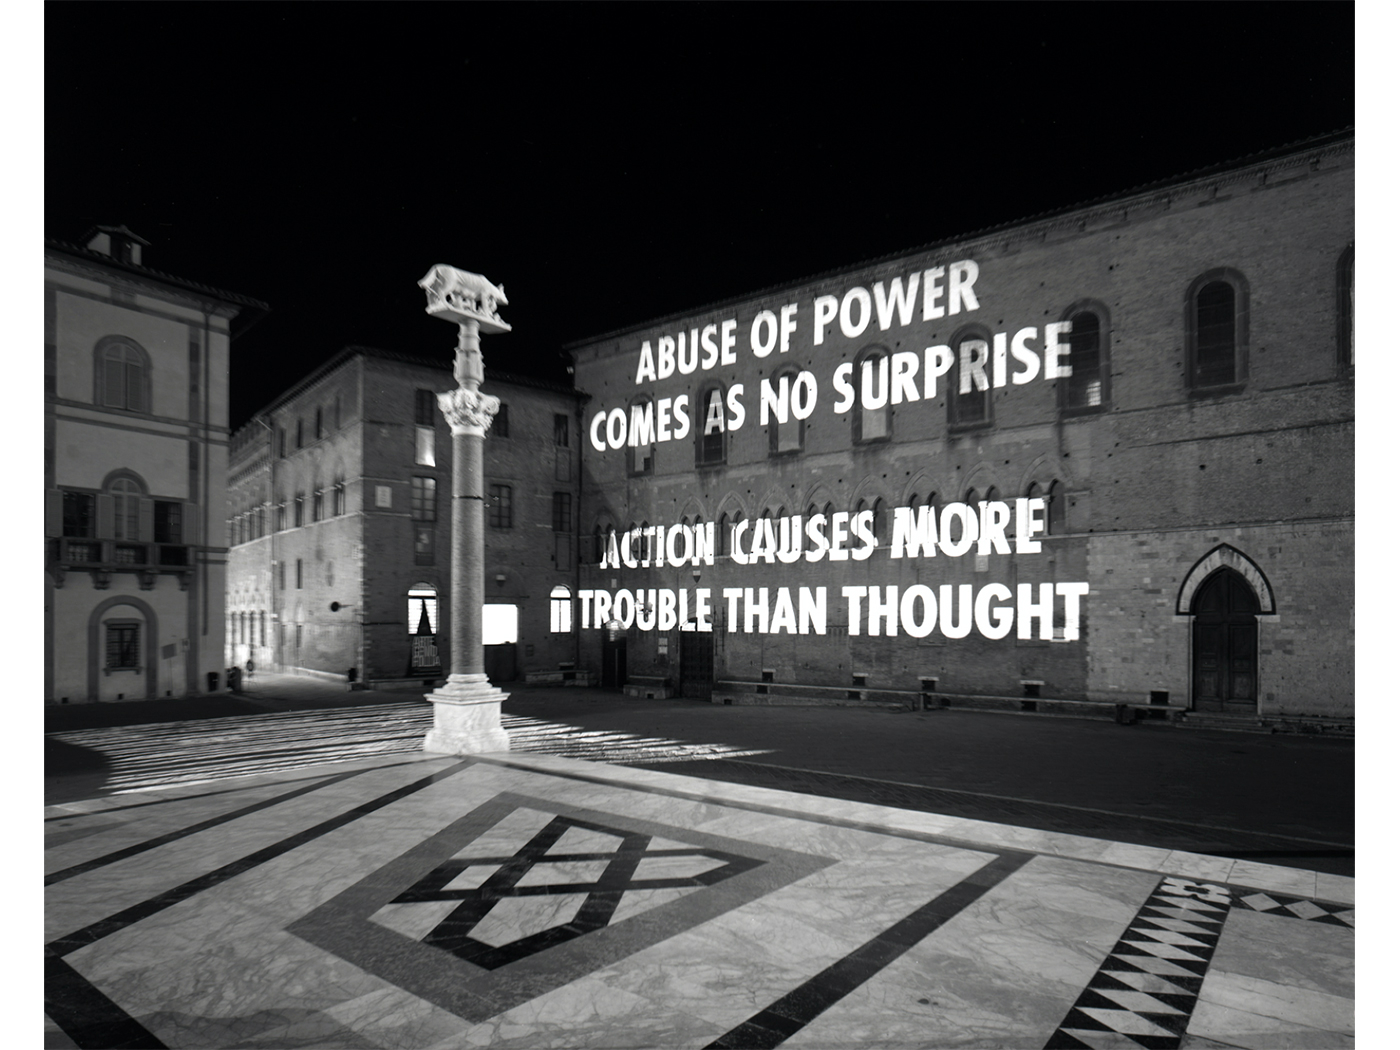 Jenny Holzer's continues to return to the snappy maxims from her 'Truisms' series – they have been projected onto grand landmarks, printed on billboard placards, carved into stone and have illuminated electronic displays. 'MORE ACTION THAN THOUGHT' (2021) is a reiteration of one of these iconic 'Trusims'.